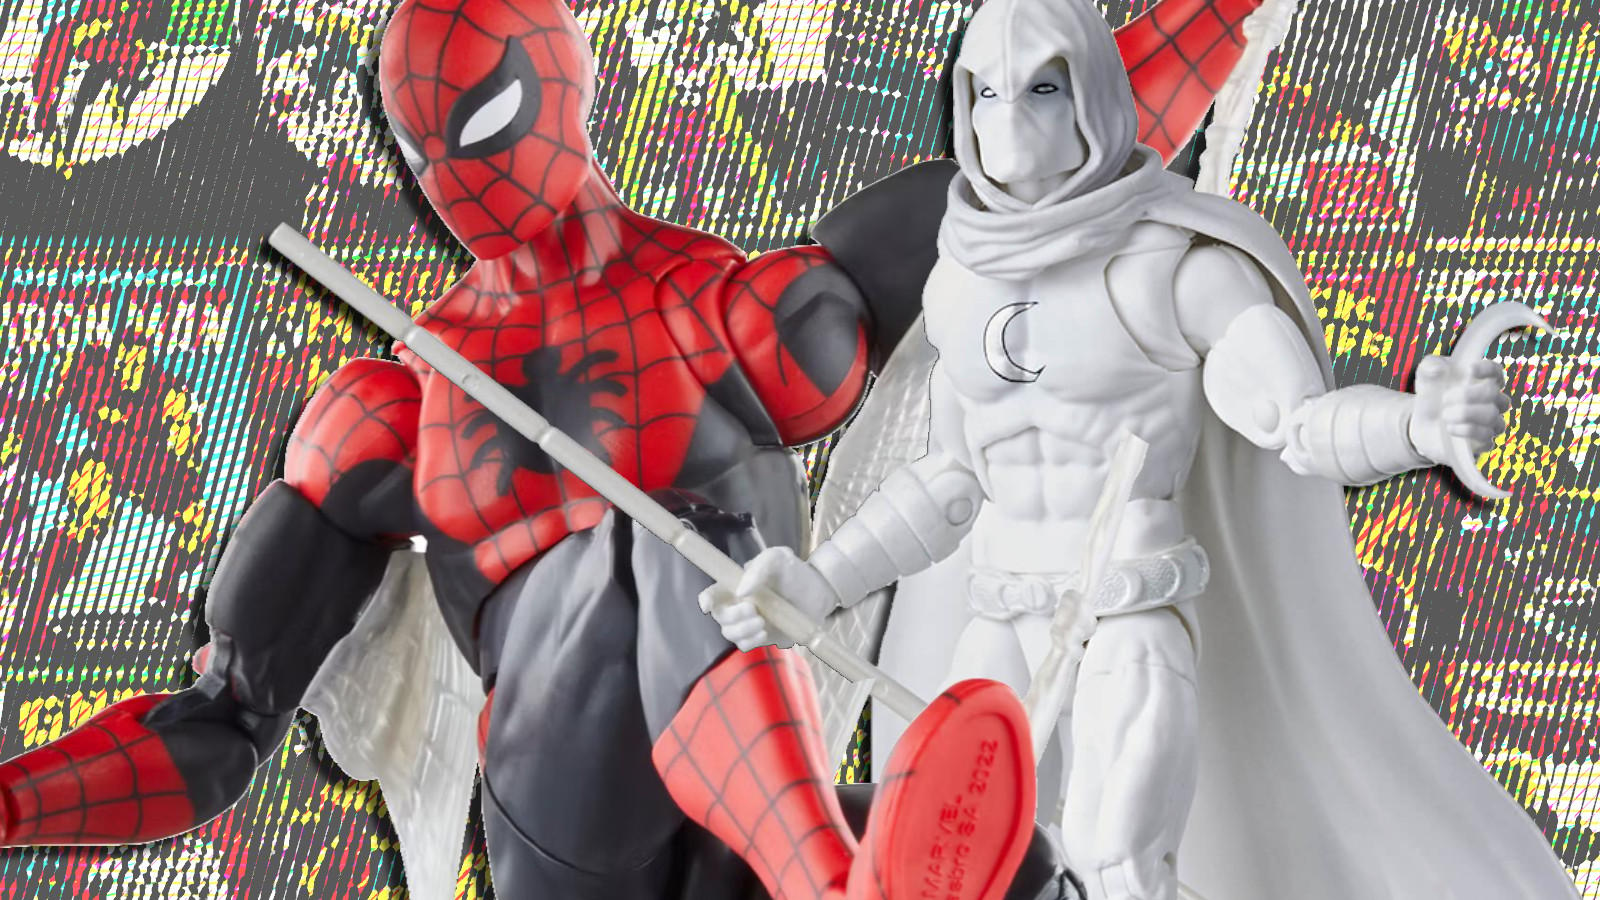 Moon Knight and Spider-Man Marvel Legends figures